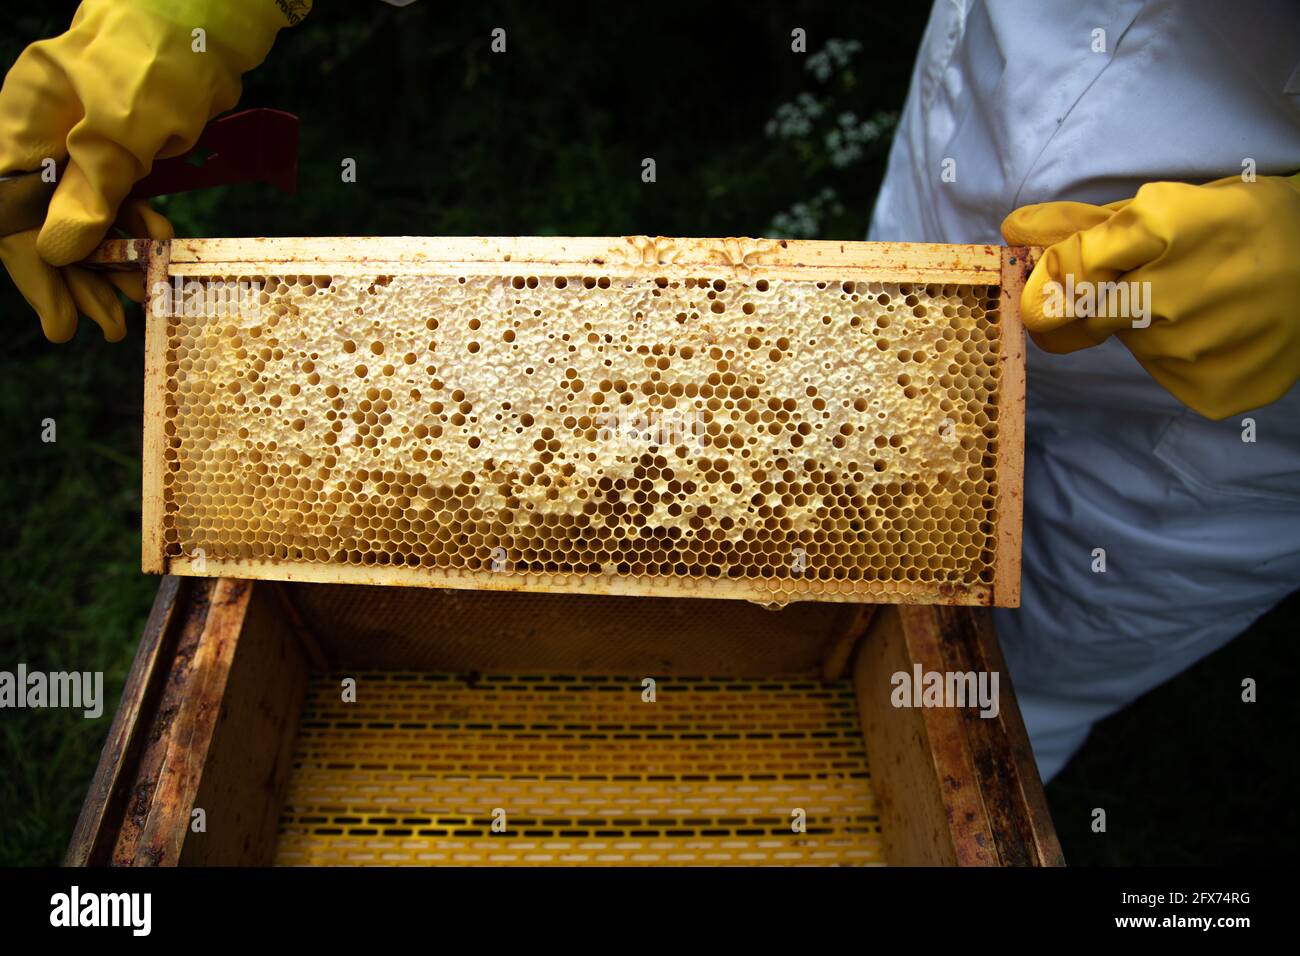 Super frame with capped honey cells and pollen stores Stock Photo